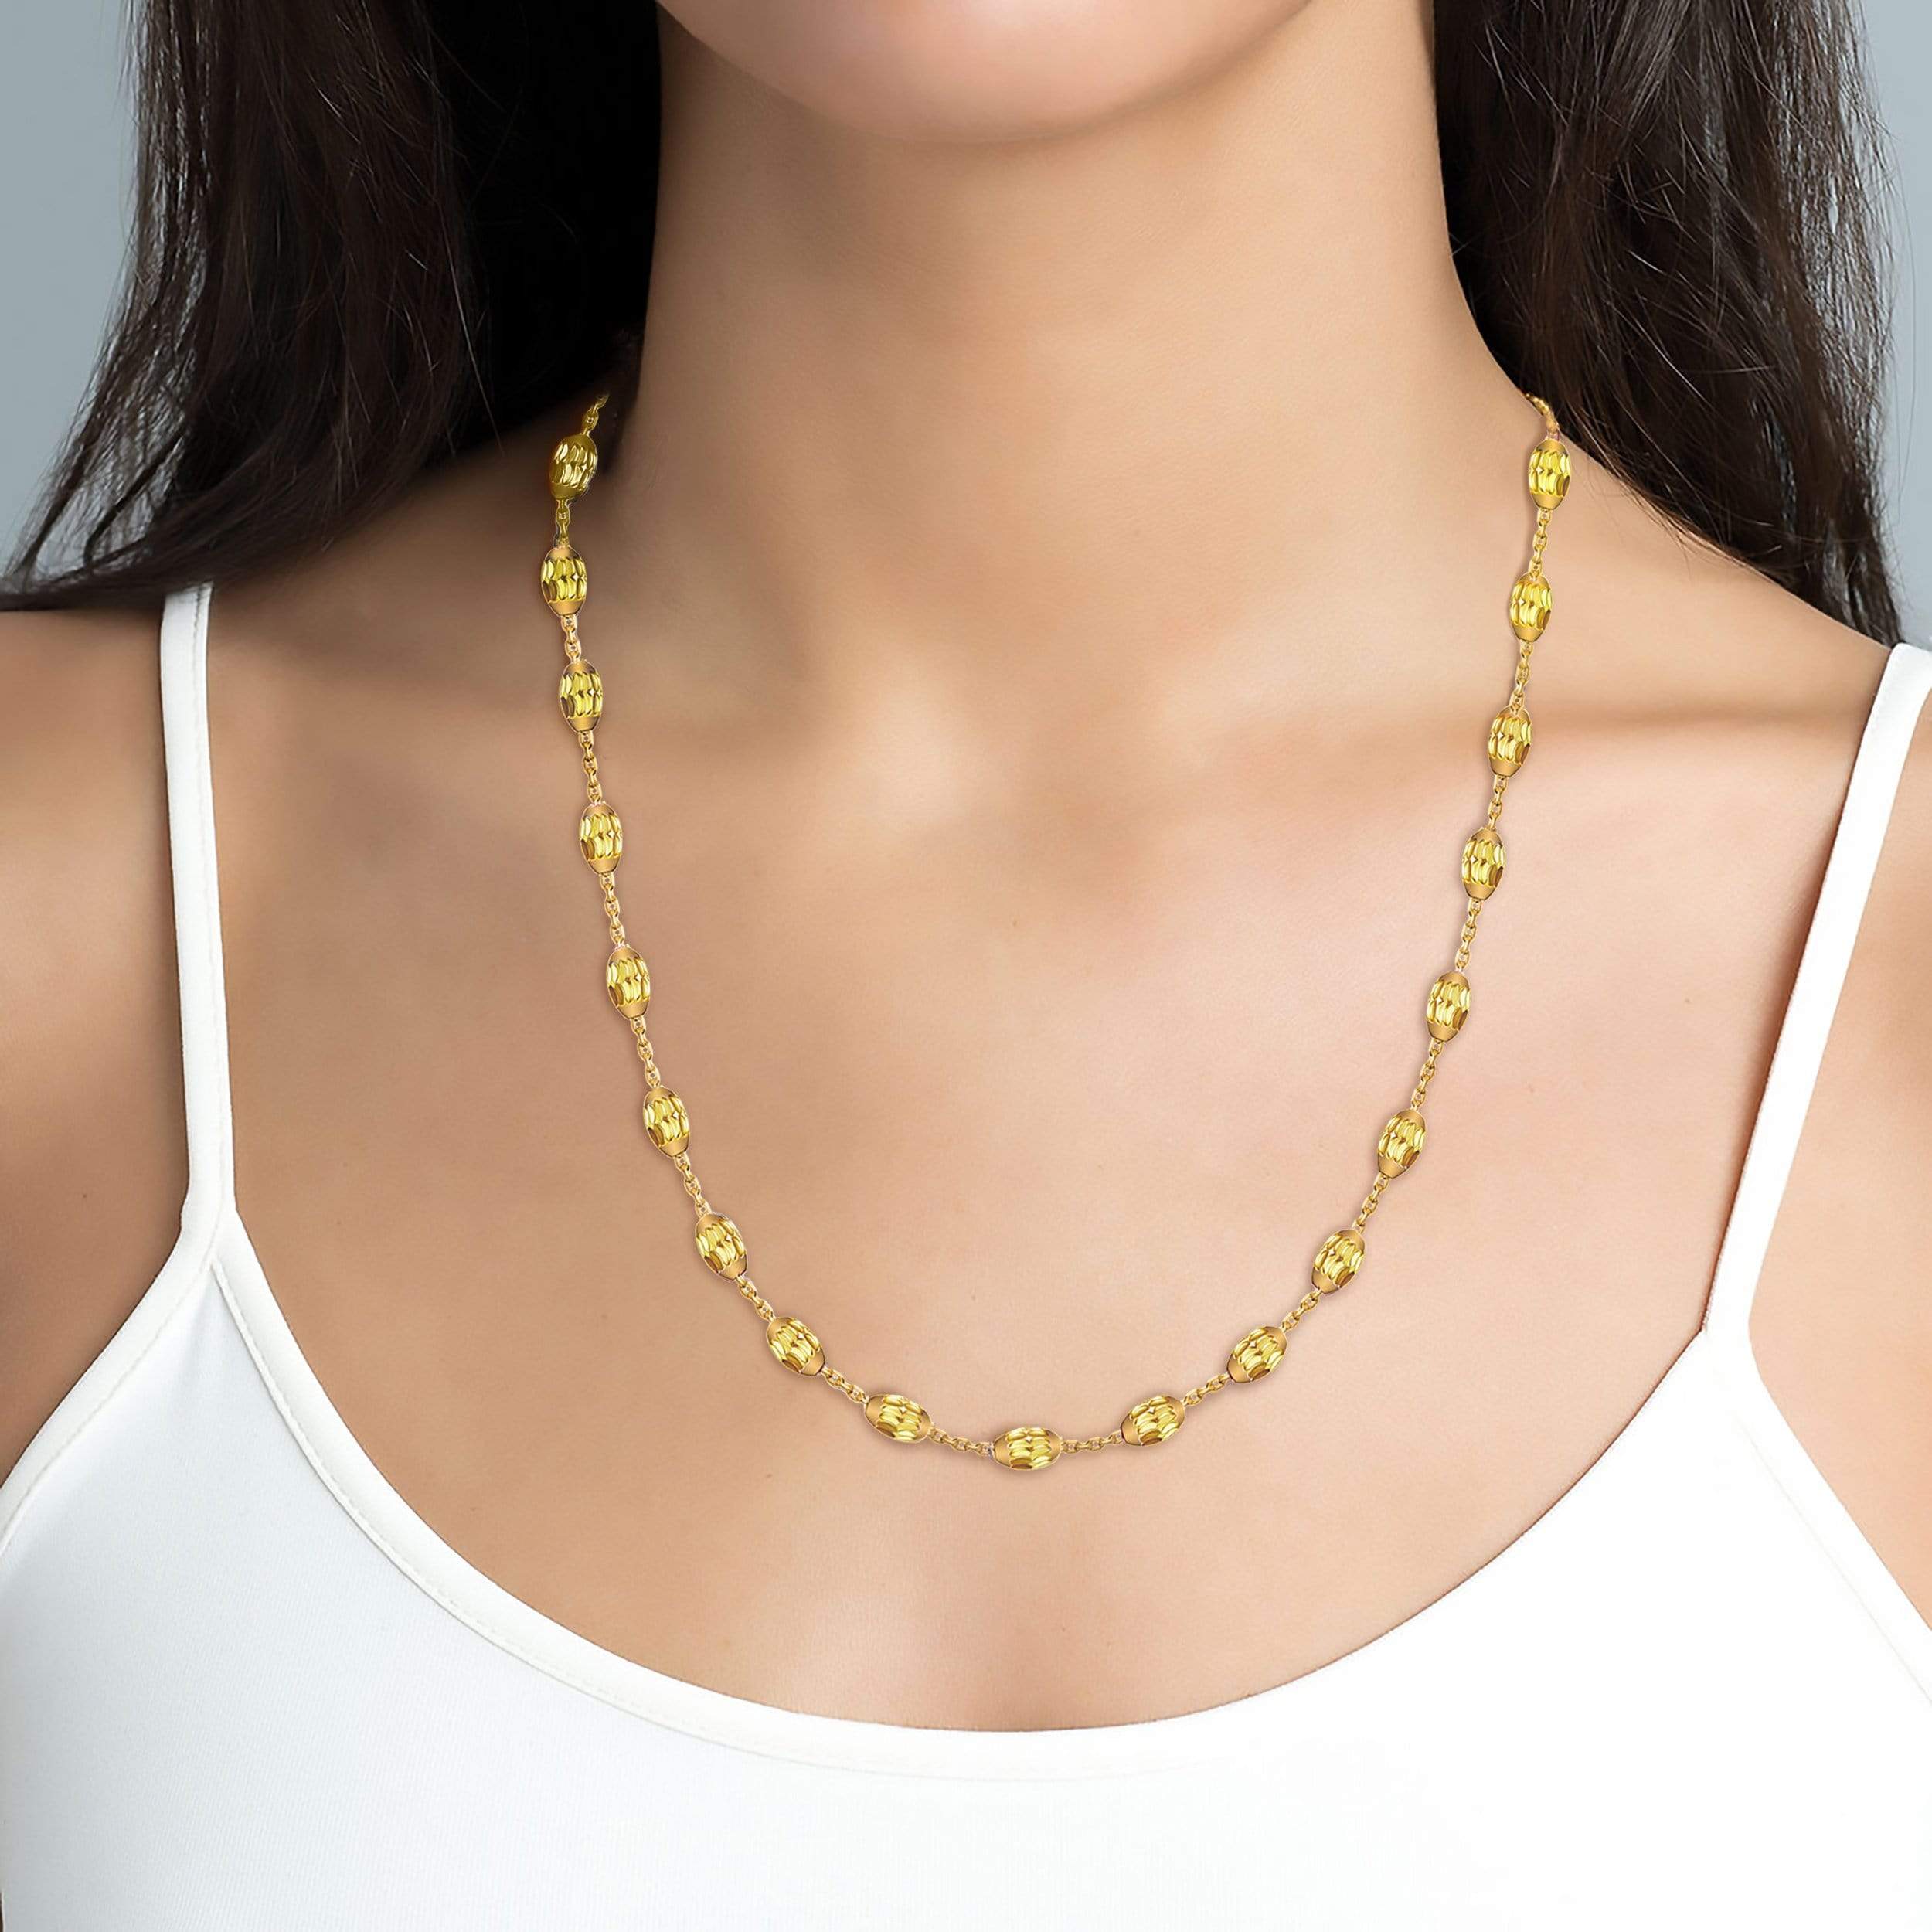 Lynora Jewellery Necklace 26" Geobeads Necklace Yellow Gold Plate